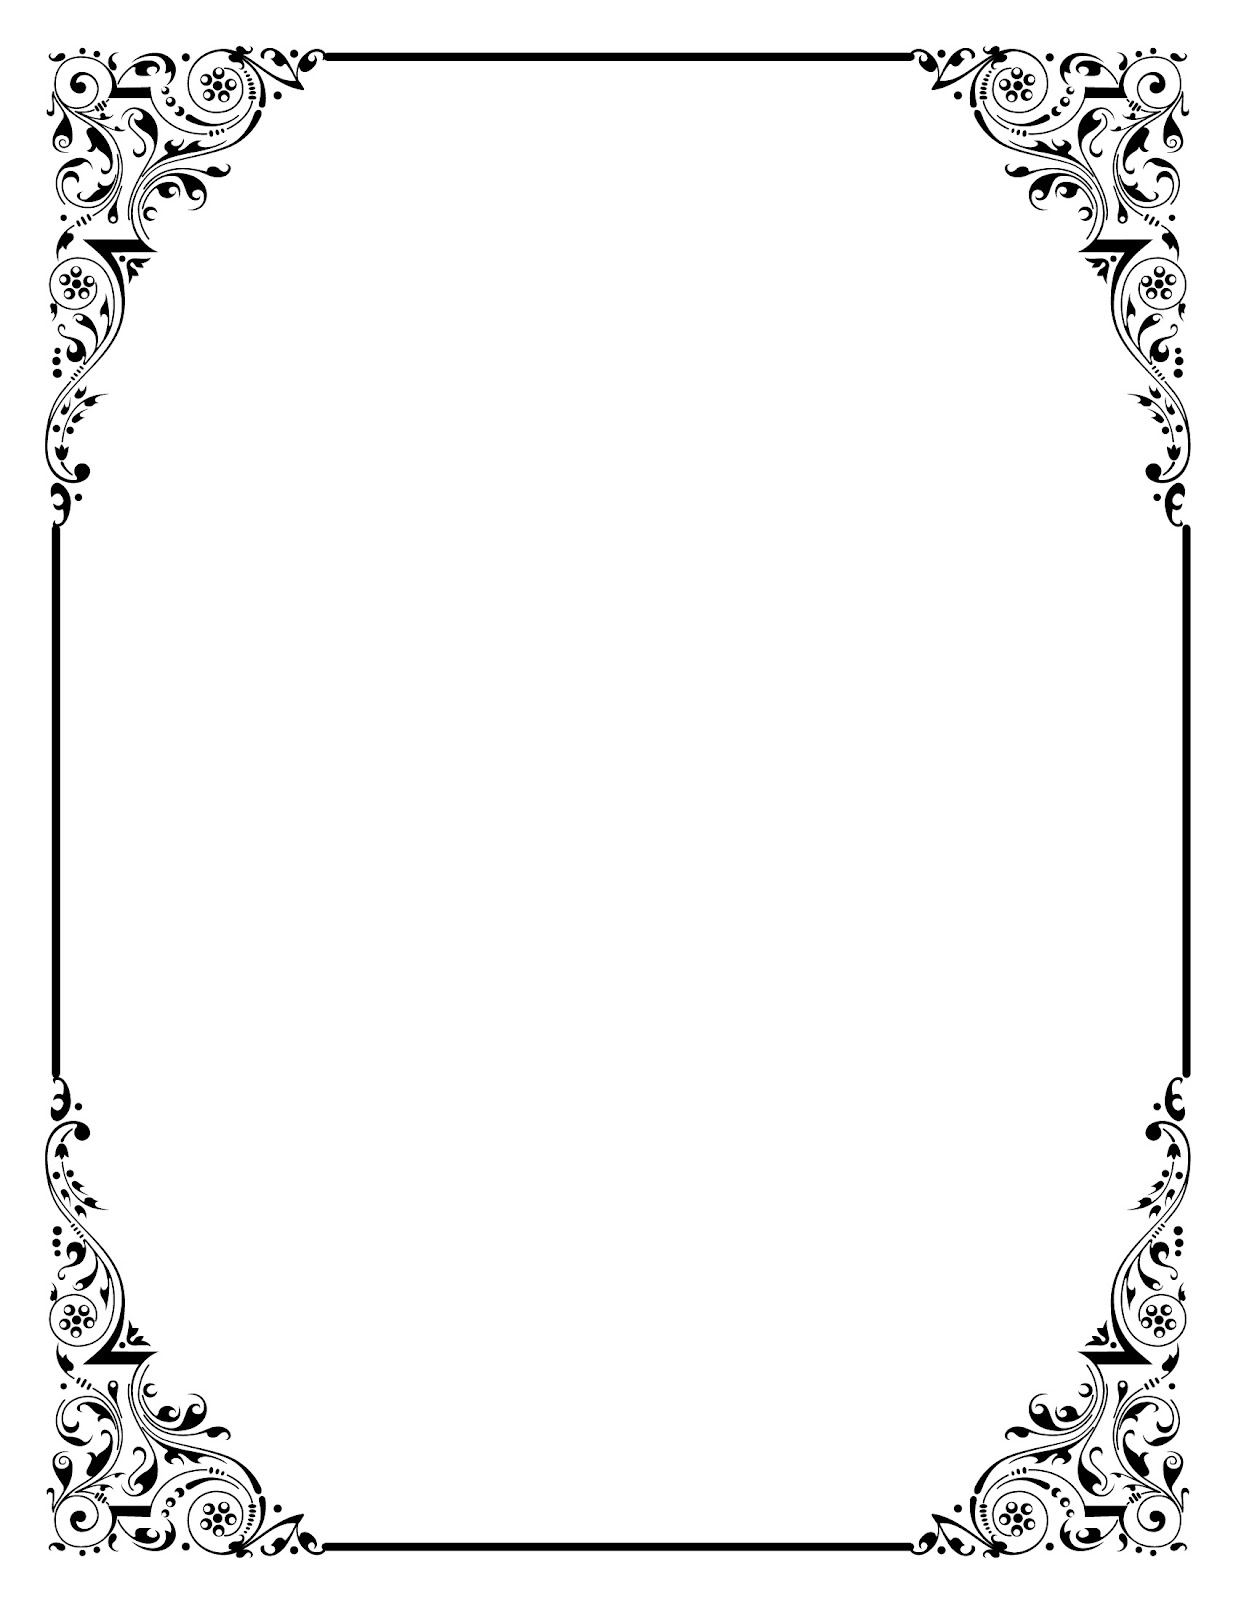 1000  images about frame on P - Clipart Frame